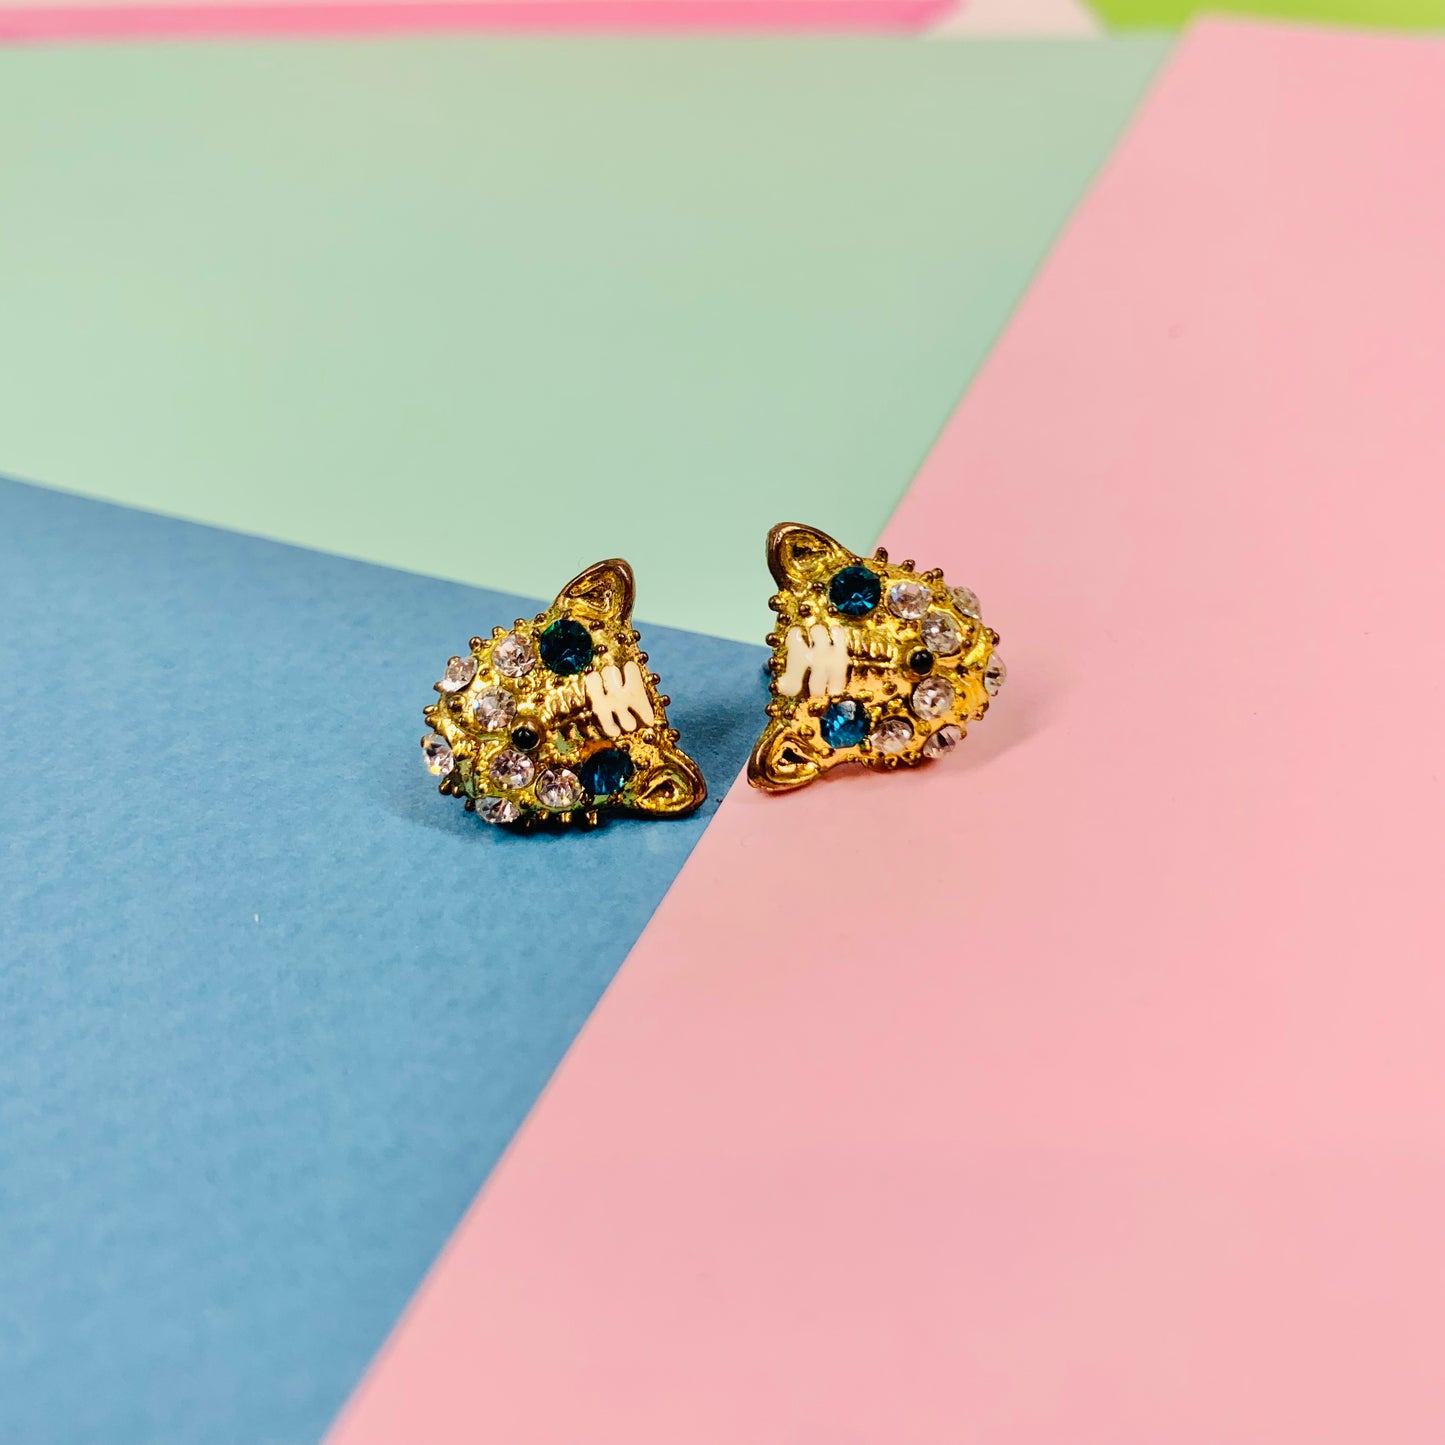 80s costume leopard ring and earrings with rhinestones